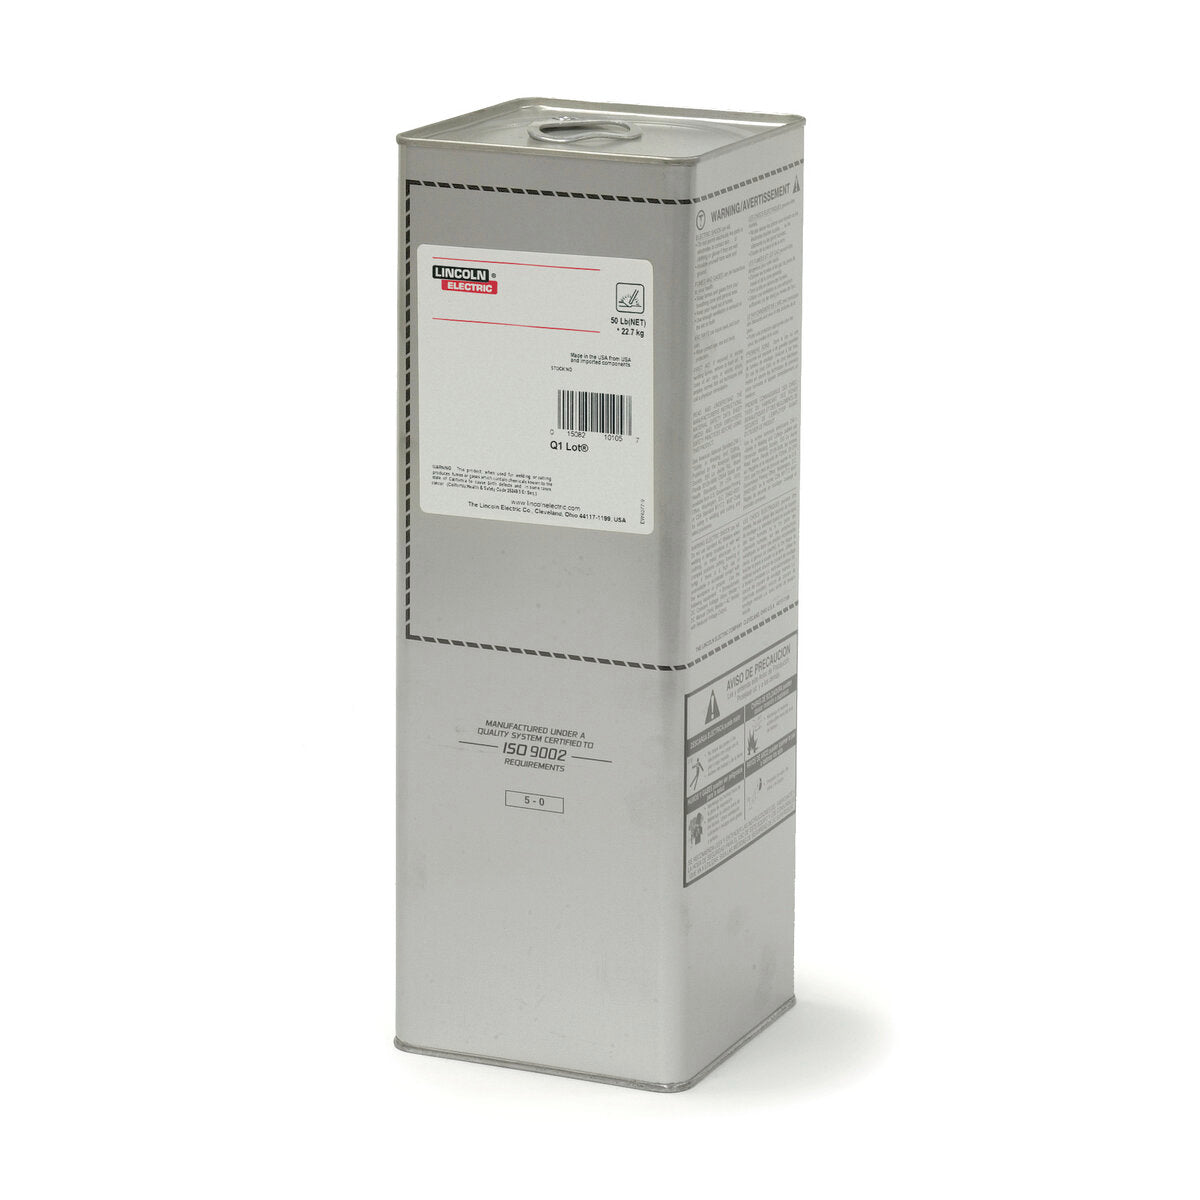 Lincoln Electric - Shield-Arc® 85 Stick (SMAW) Electrode, 5/32x14 in, 50 lb Easy Open Can - ED012896